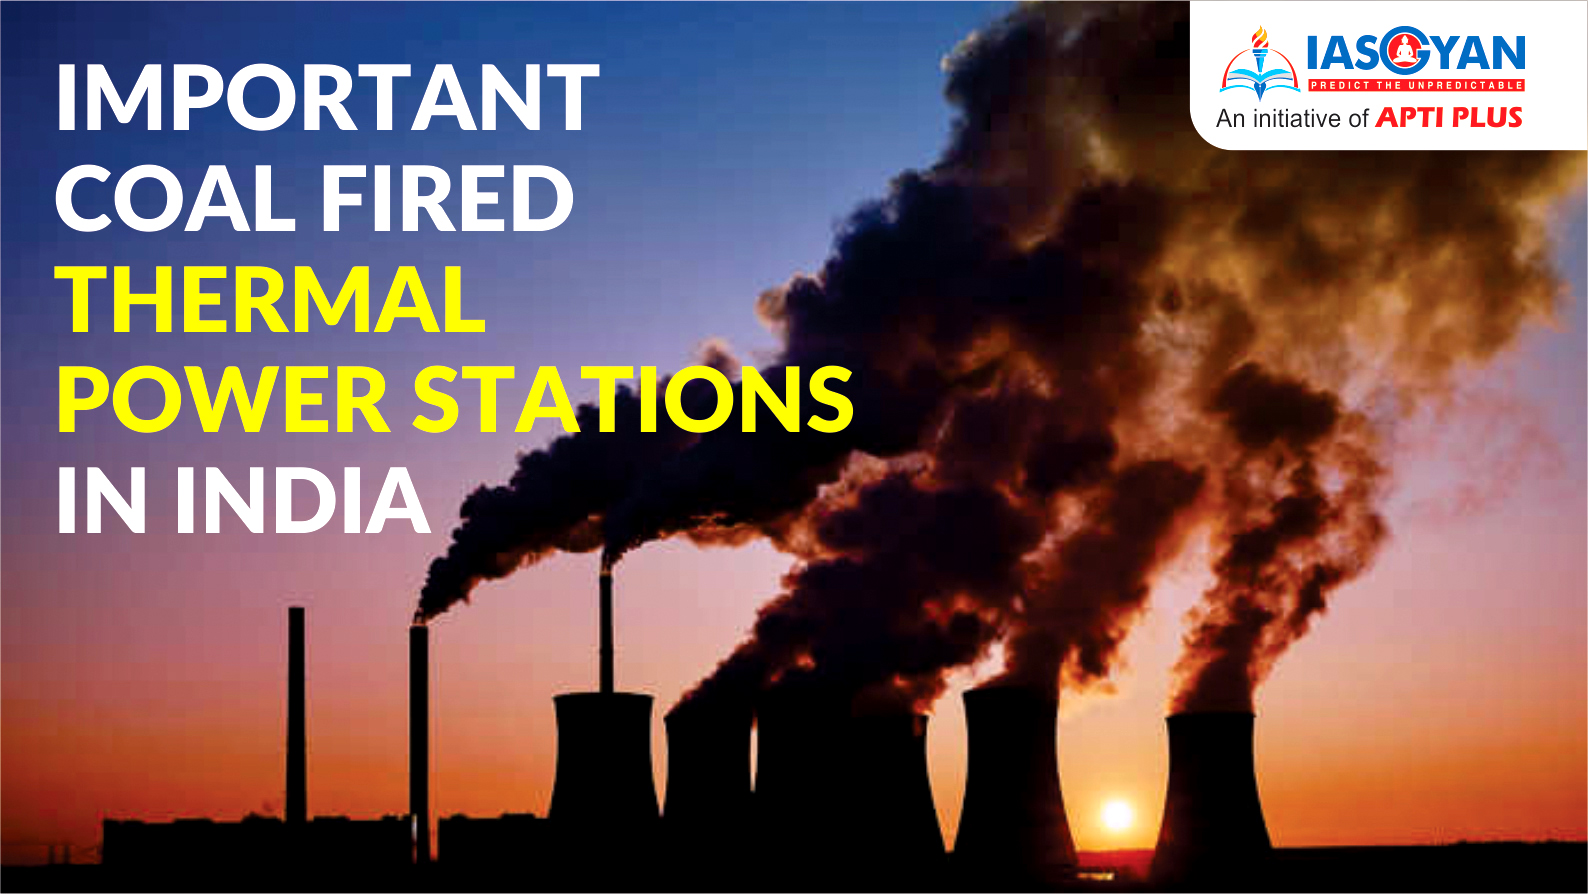 IMPORTANT COAL FIRED THERMAL POWER STATIONS IN INDIA